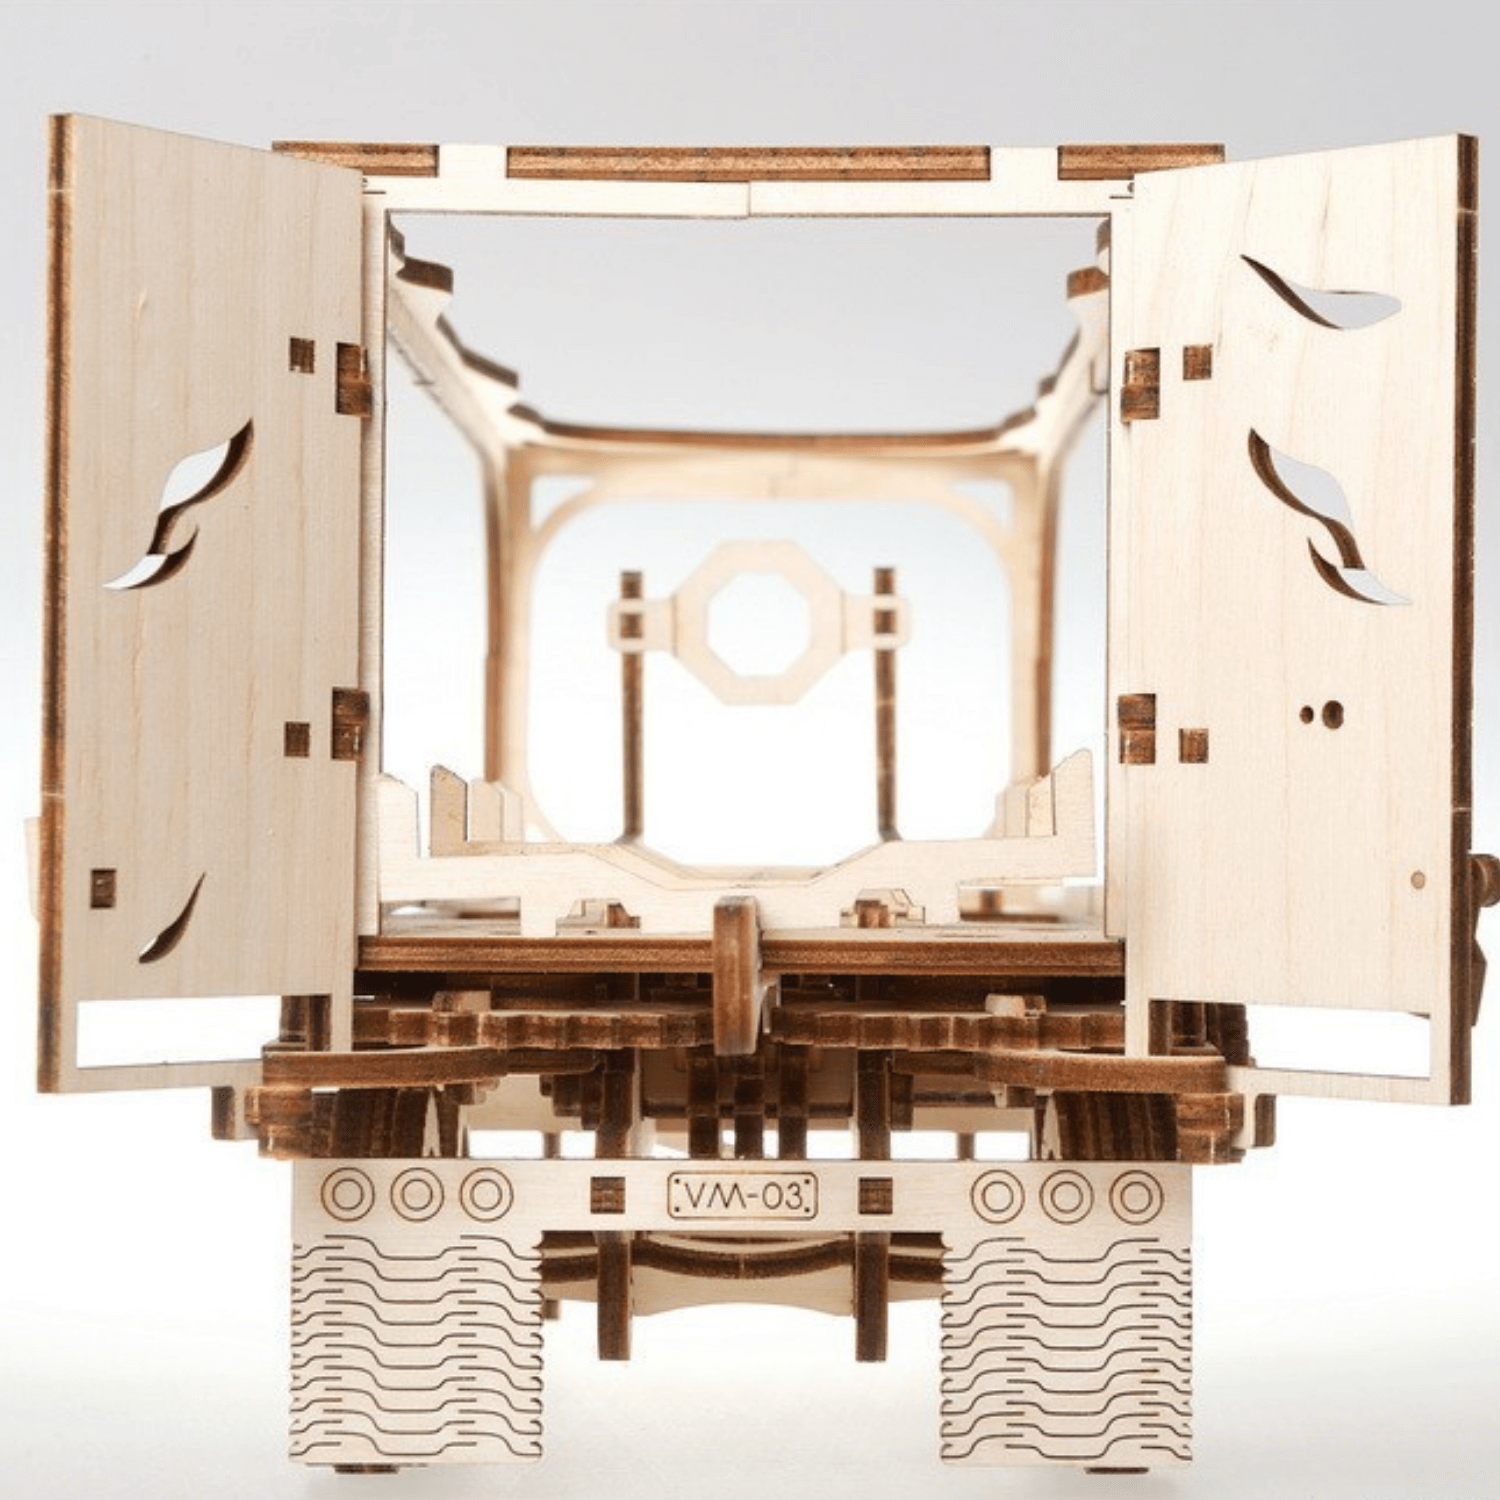 Trailer for "Heavy Boy"-Mechanical Wooden Puzzle Ugears--